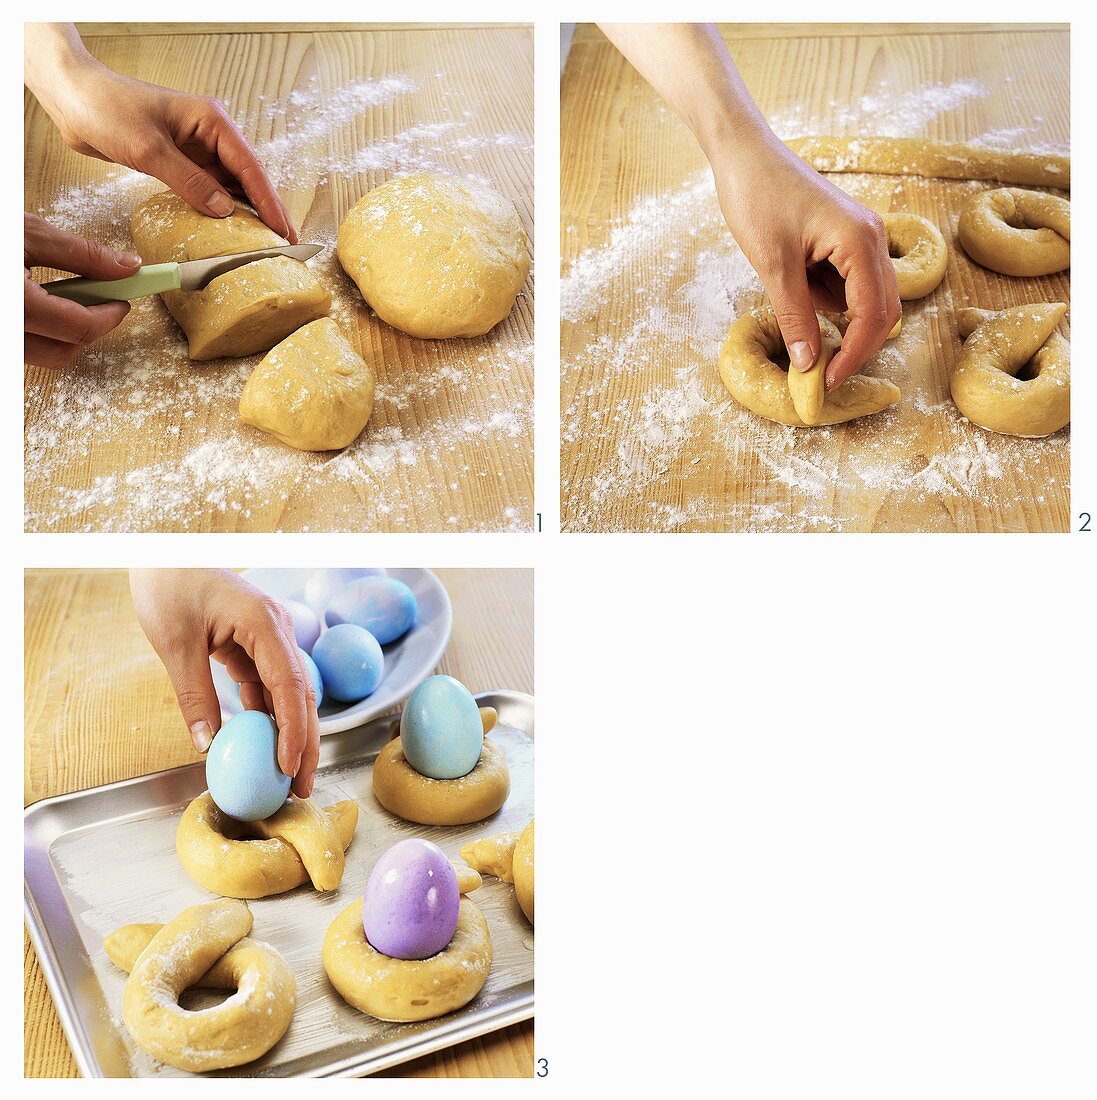 Making bread knots with eggs (Greek Easter speciality)